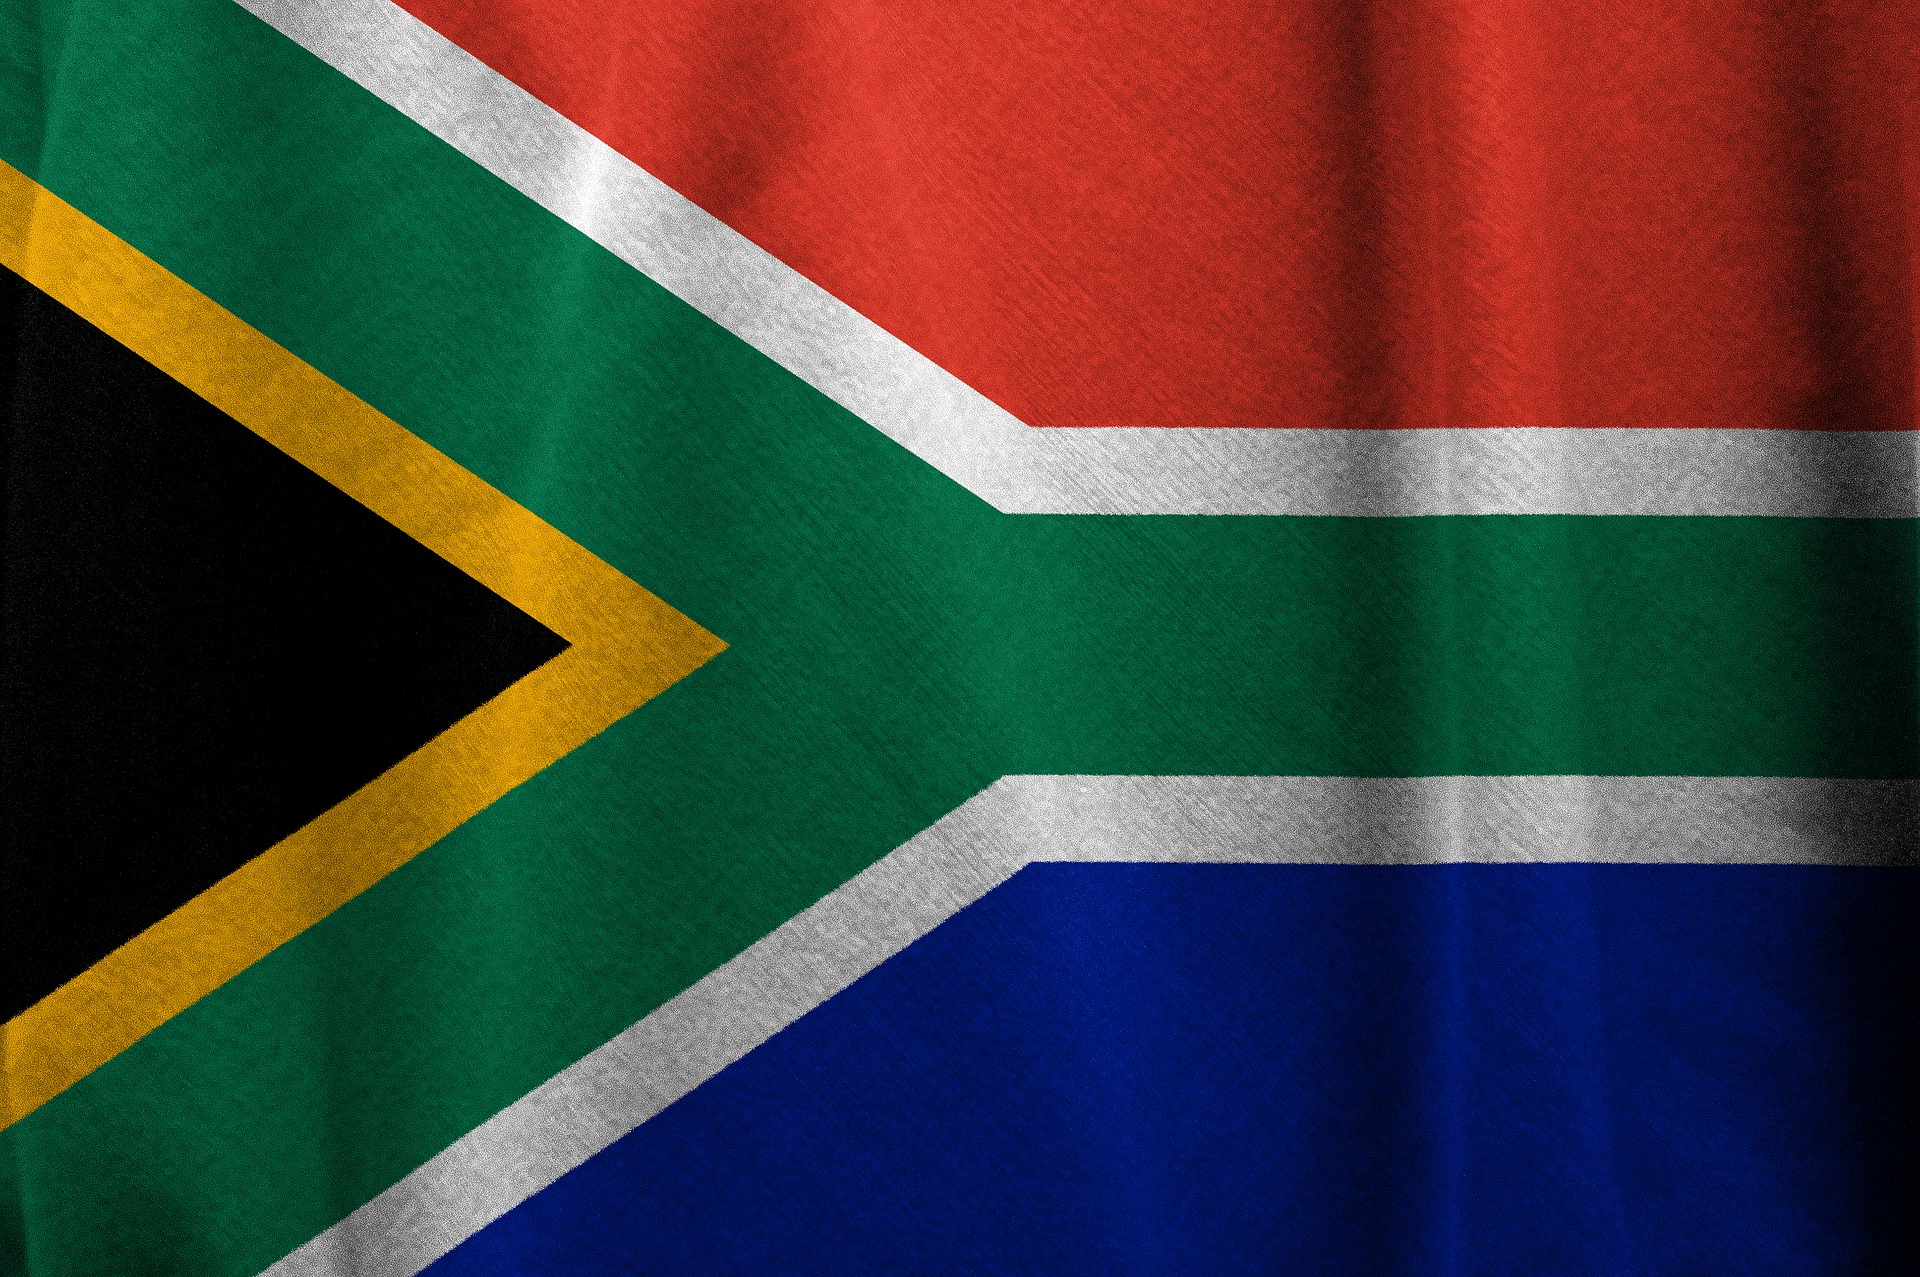 South Africa’s Crypto Regulation: Trends & Future”